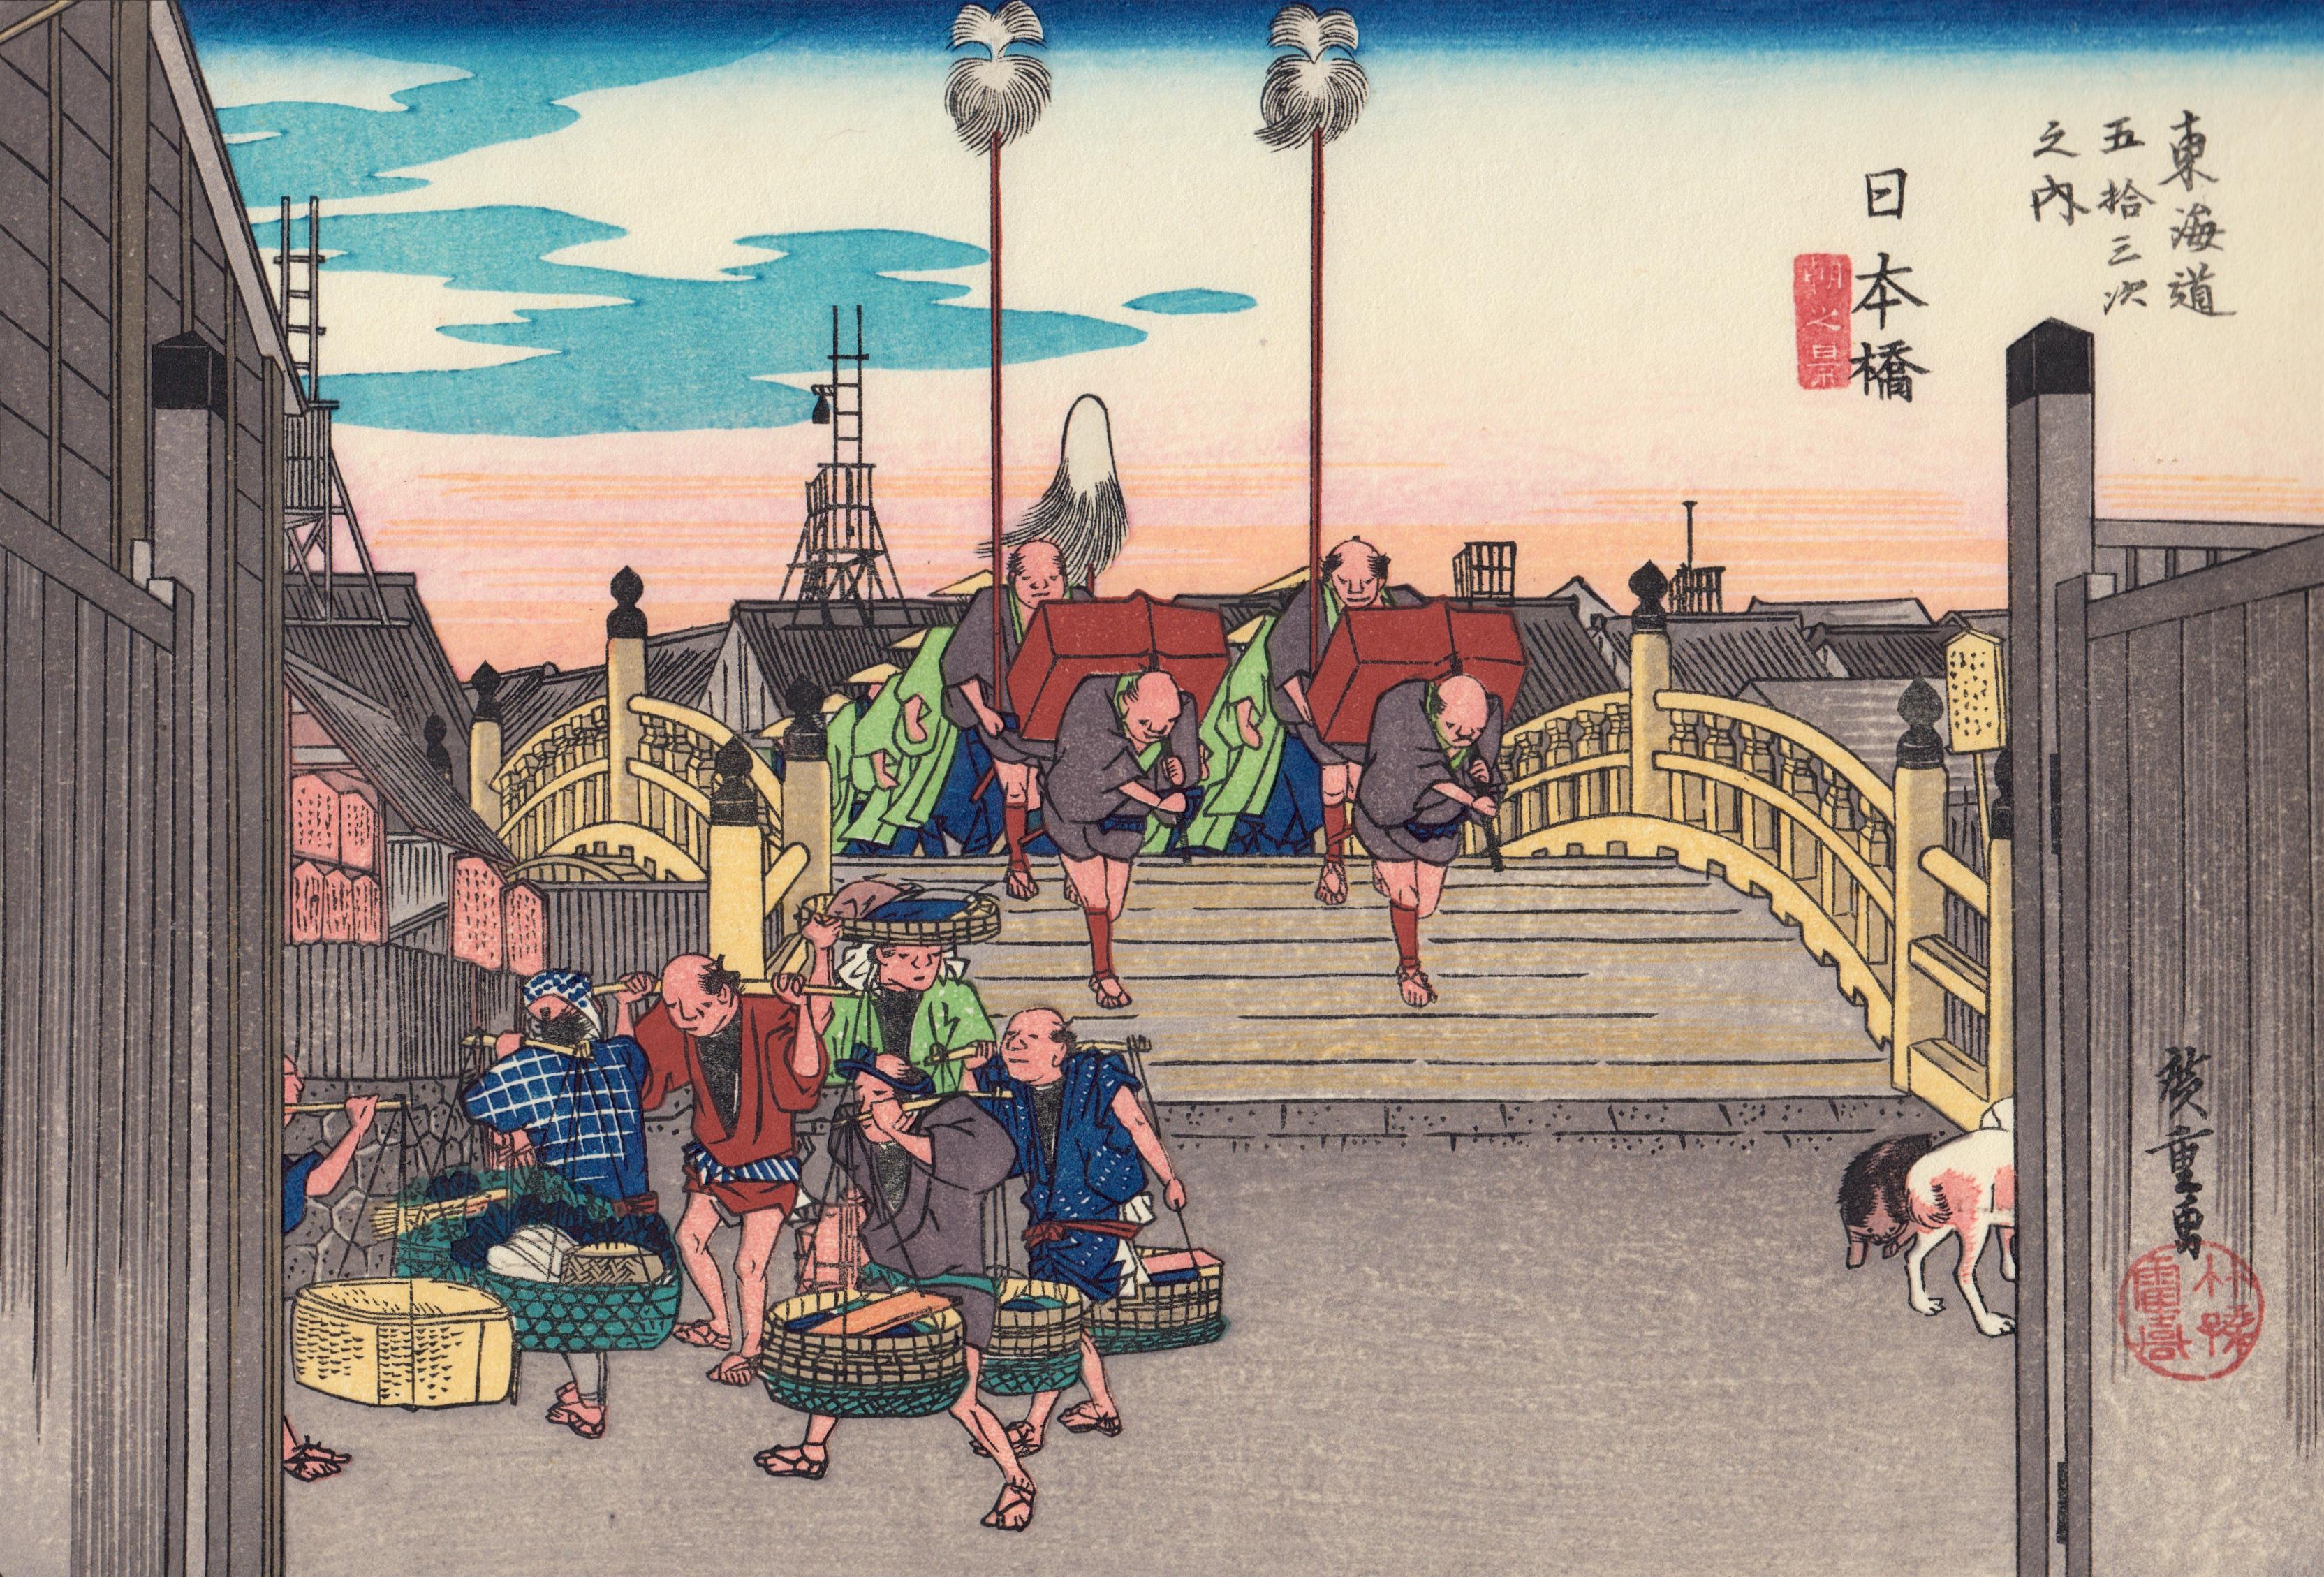 This offer includes a real fine 20th century woodblock reprint of Utagawa Hiroshige's Fifty-three Stations of the Tokaido. The series, originally published between 1833-1834, made Hiroshige to become one of the greatest Japanese landscape artists of